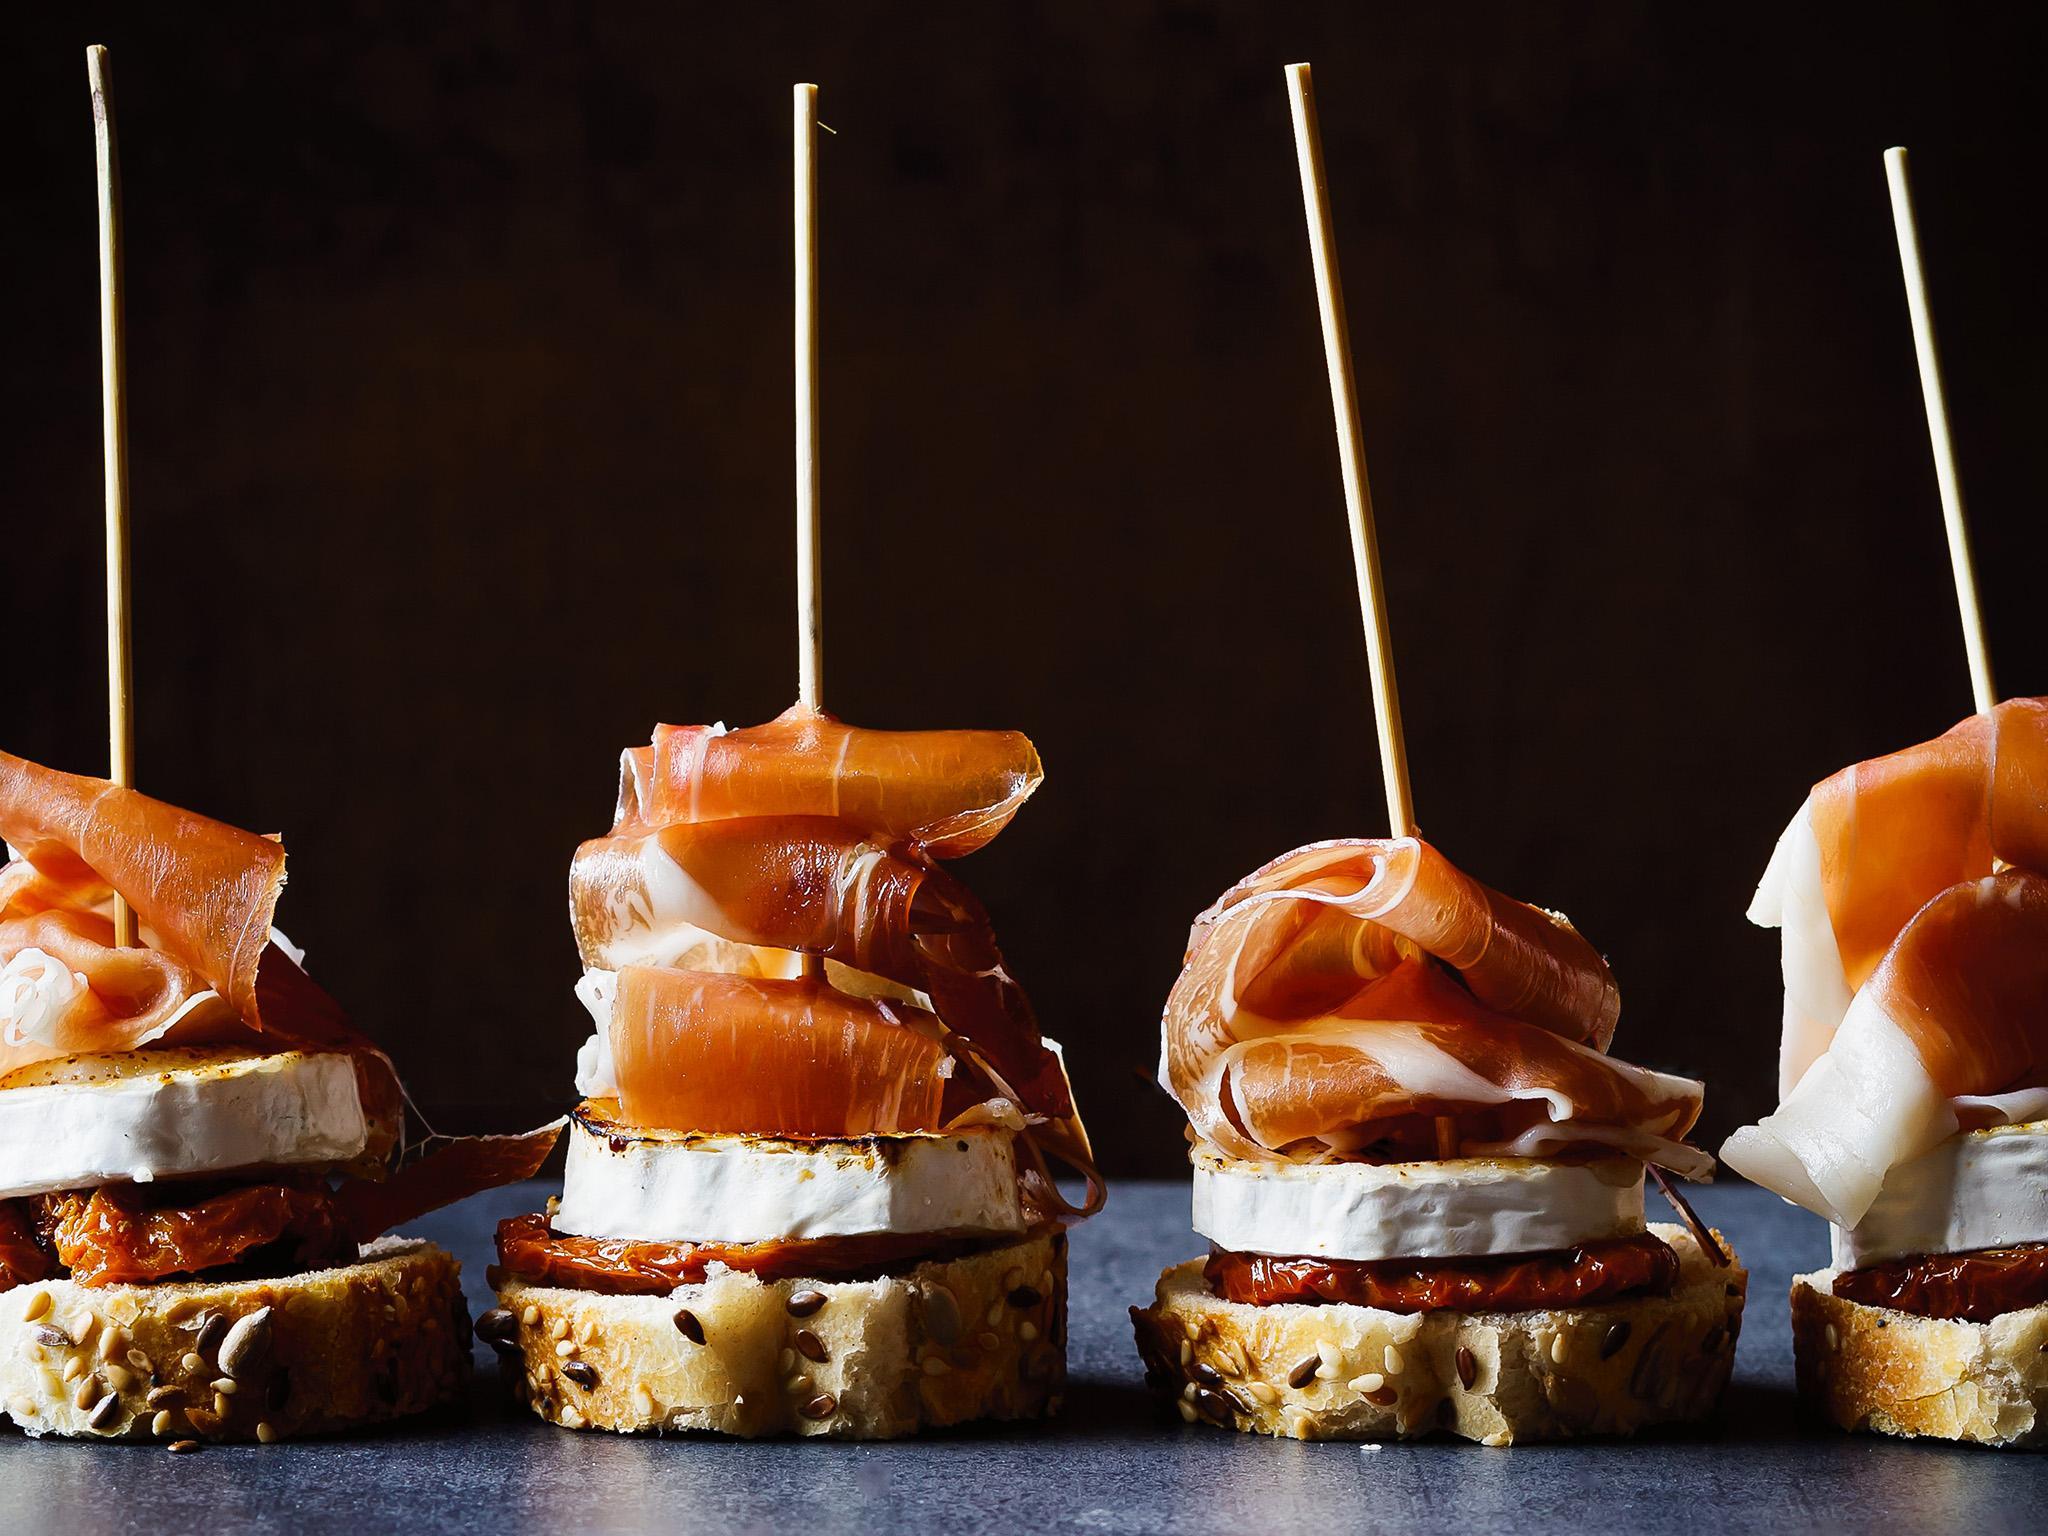 In the early days, its summer visitors from the interior of Spain who are the ones who begin to refer to these toothpick-held pickles as pinchos